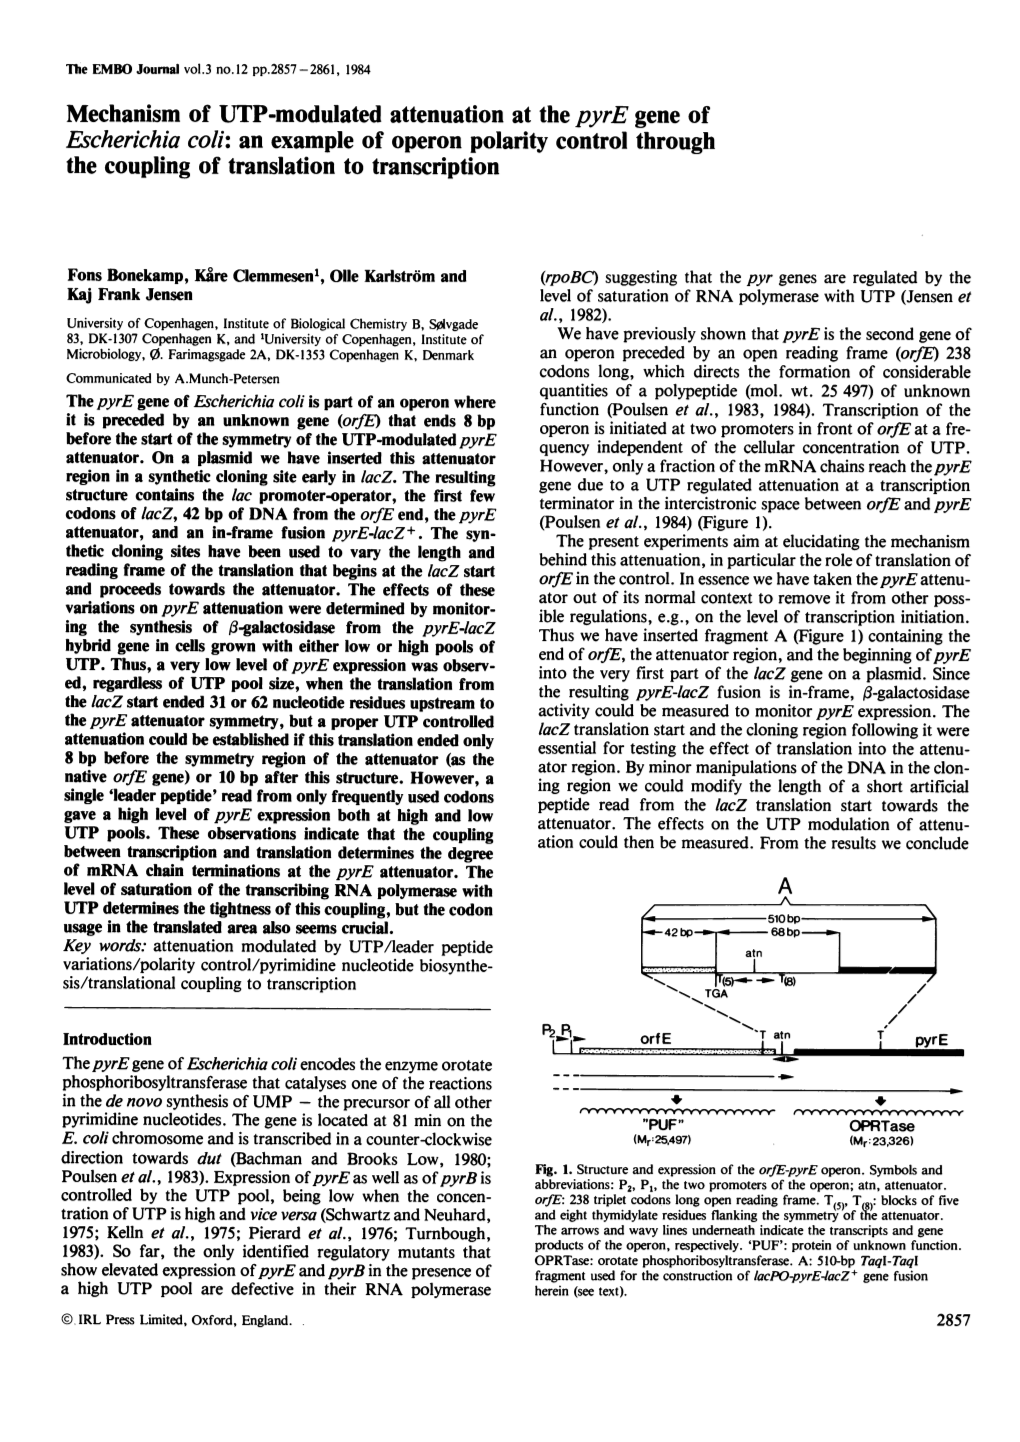 Mechanism of UTP-Modulated Attenuation at the Pyre Gene Of